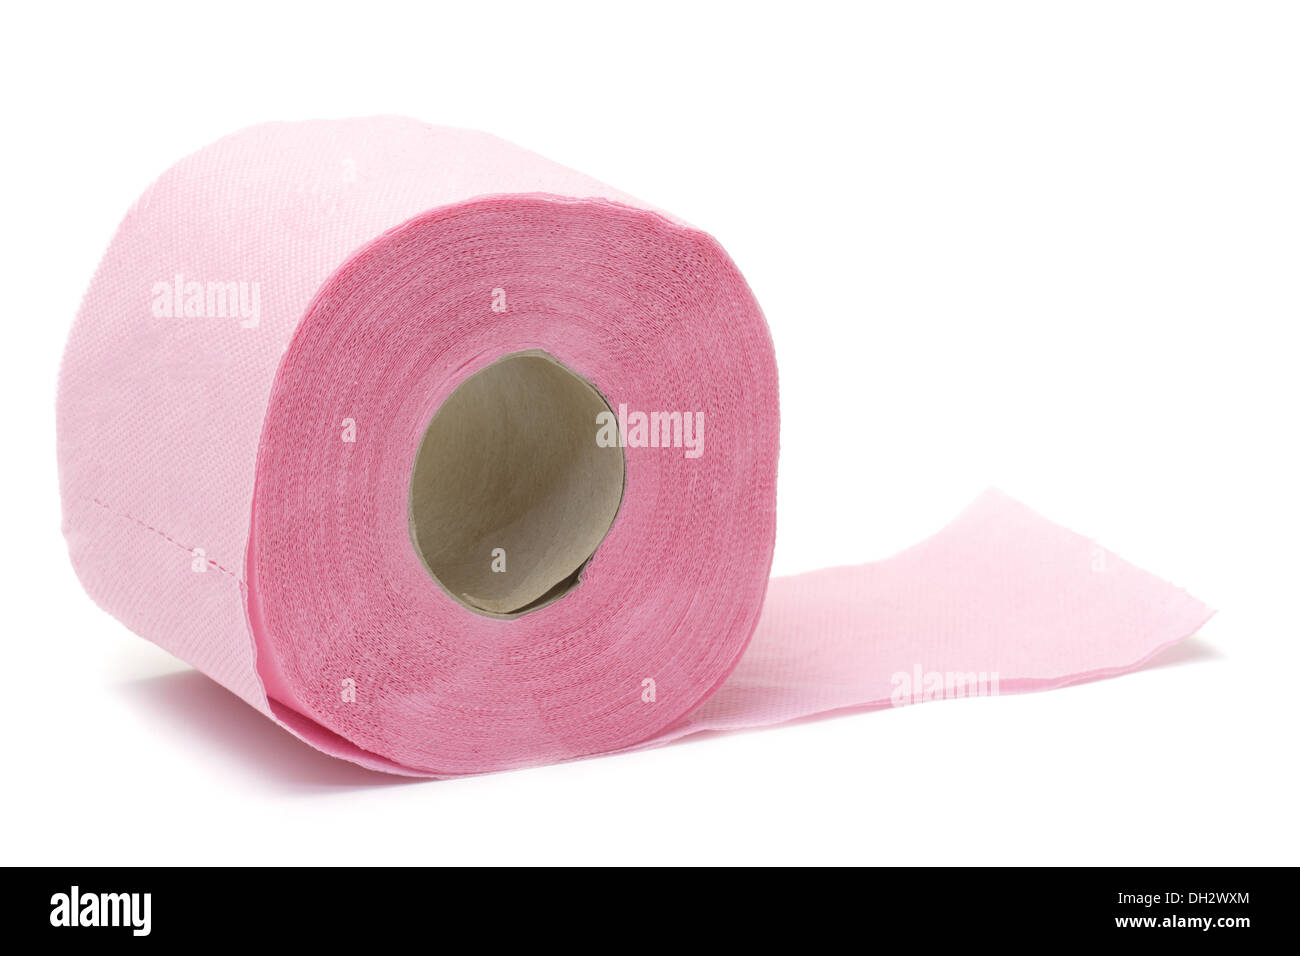 CYGURT Pink Toilet Paper，Toilet Roll，Fucsia Paper (Pack of 4 Roll)